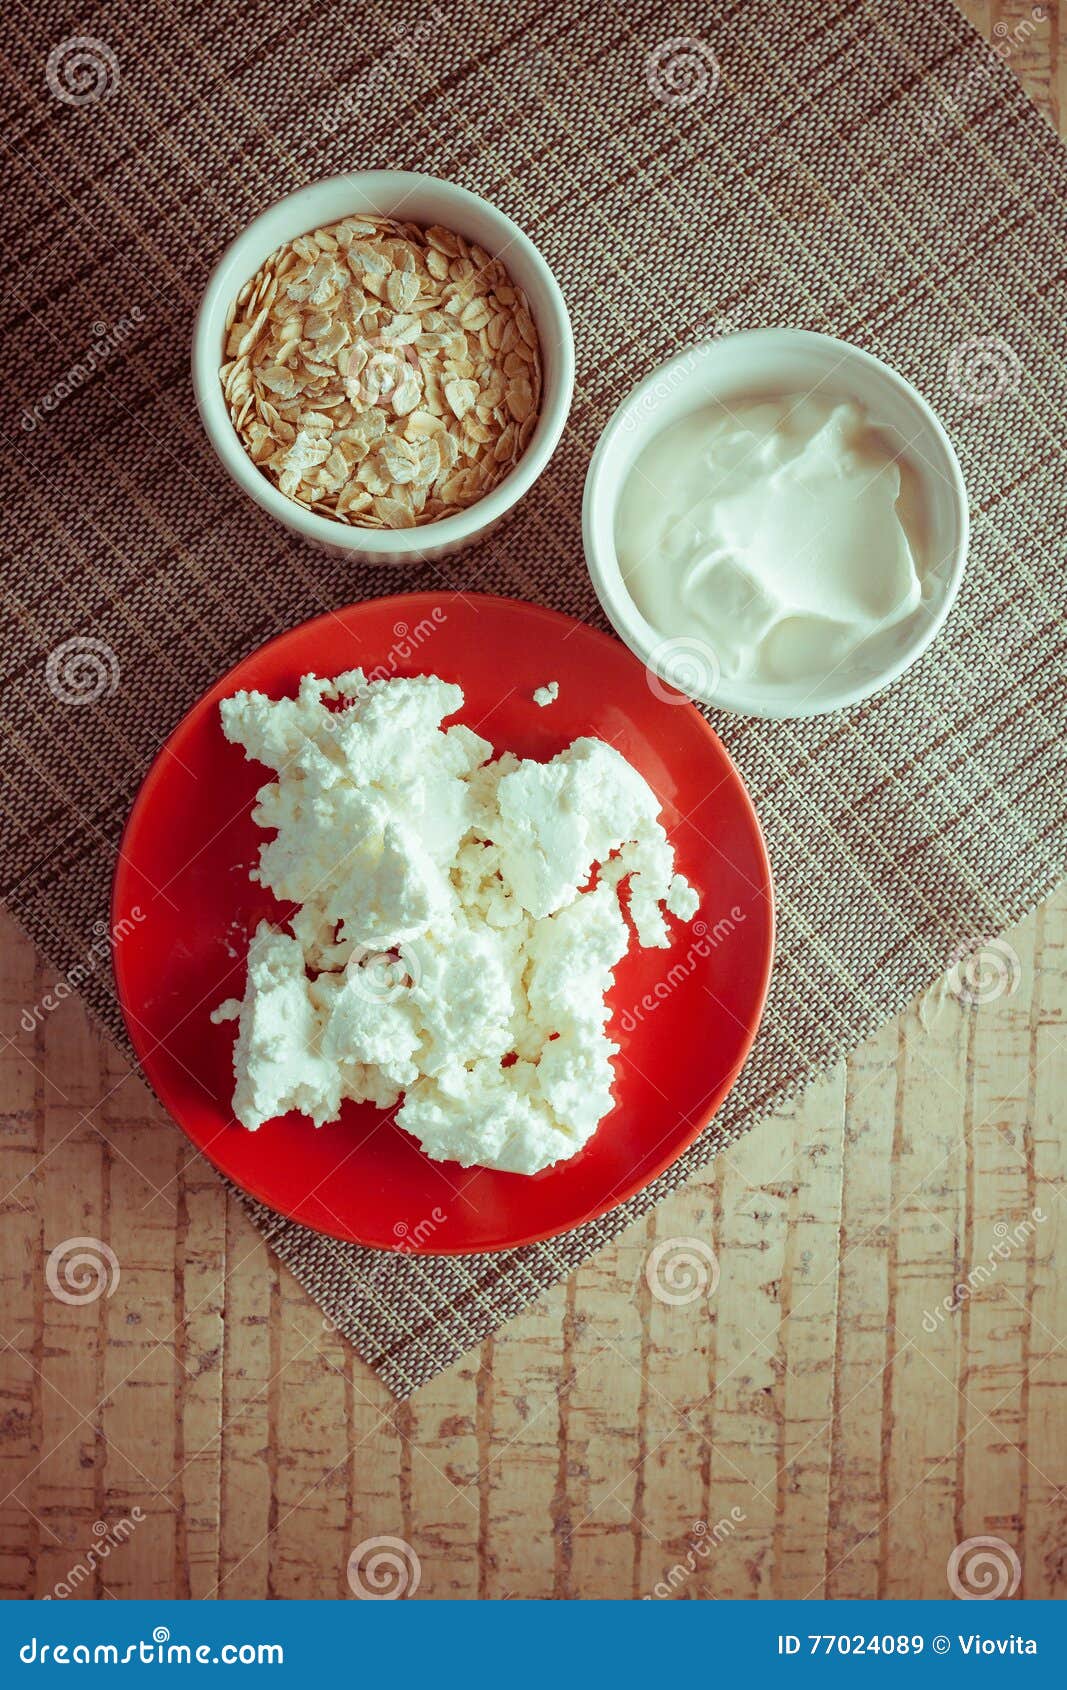 Dairy Products And Wheat Germs Stock Image - Image of ...